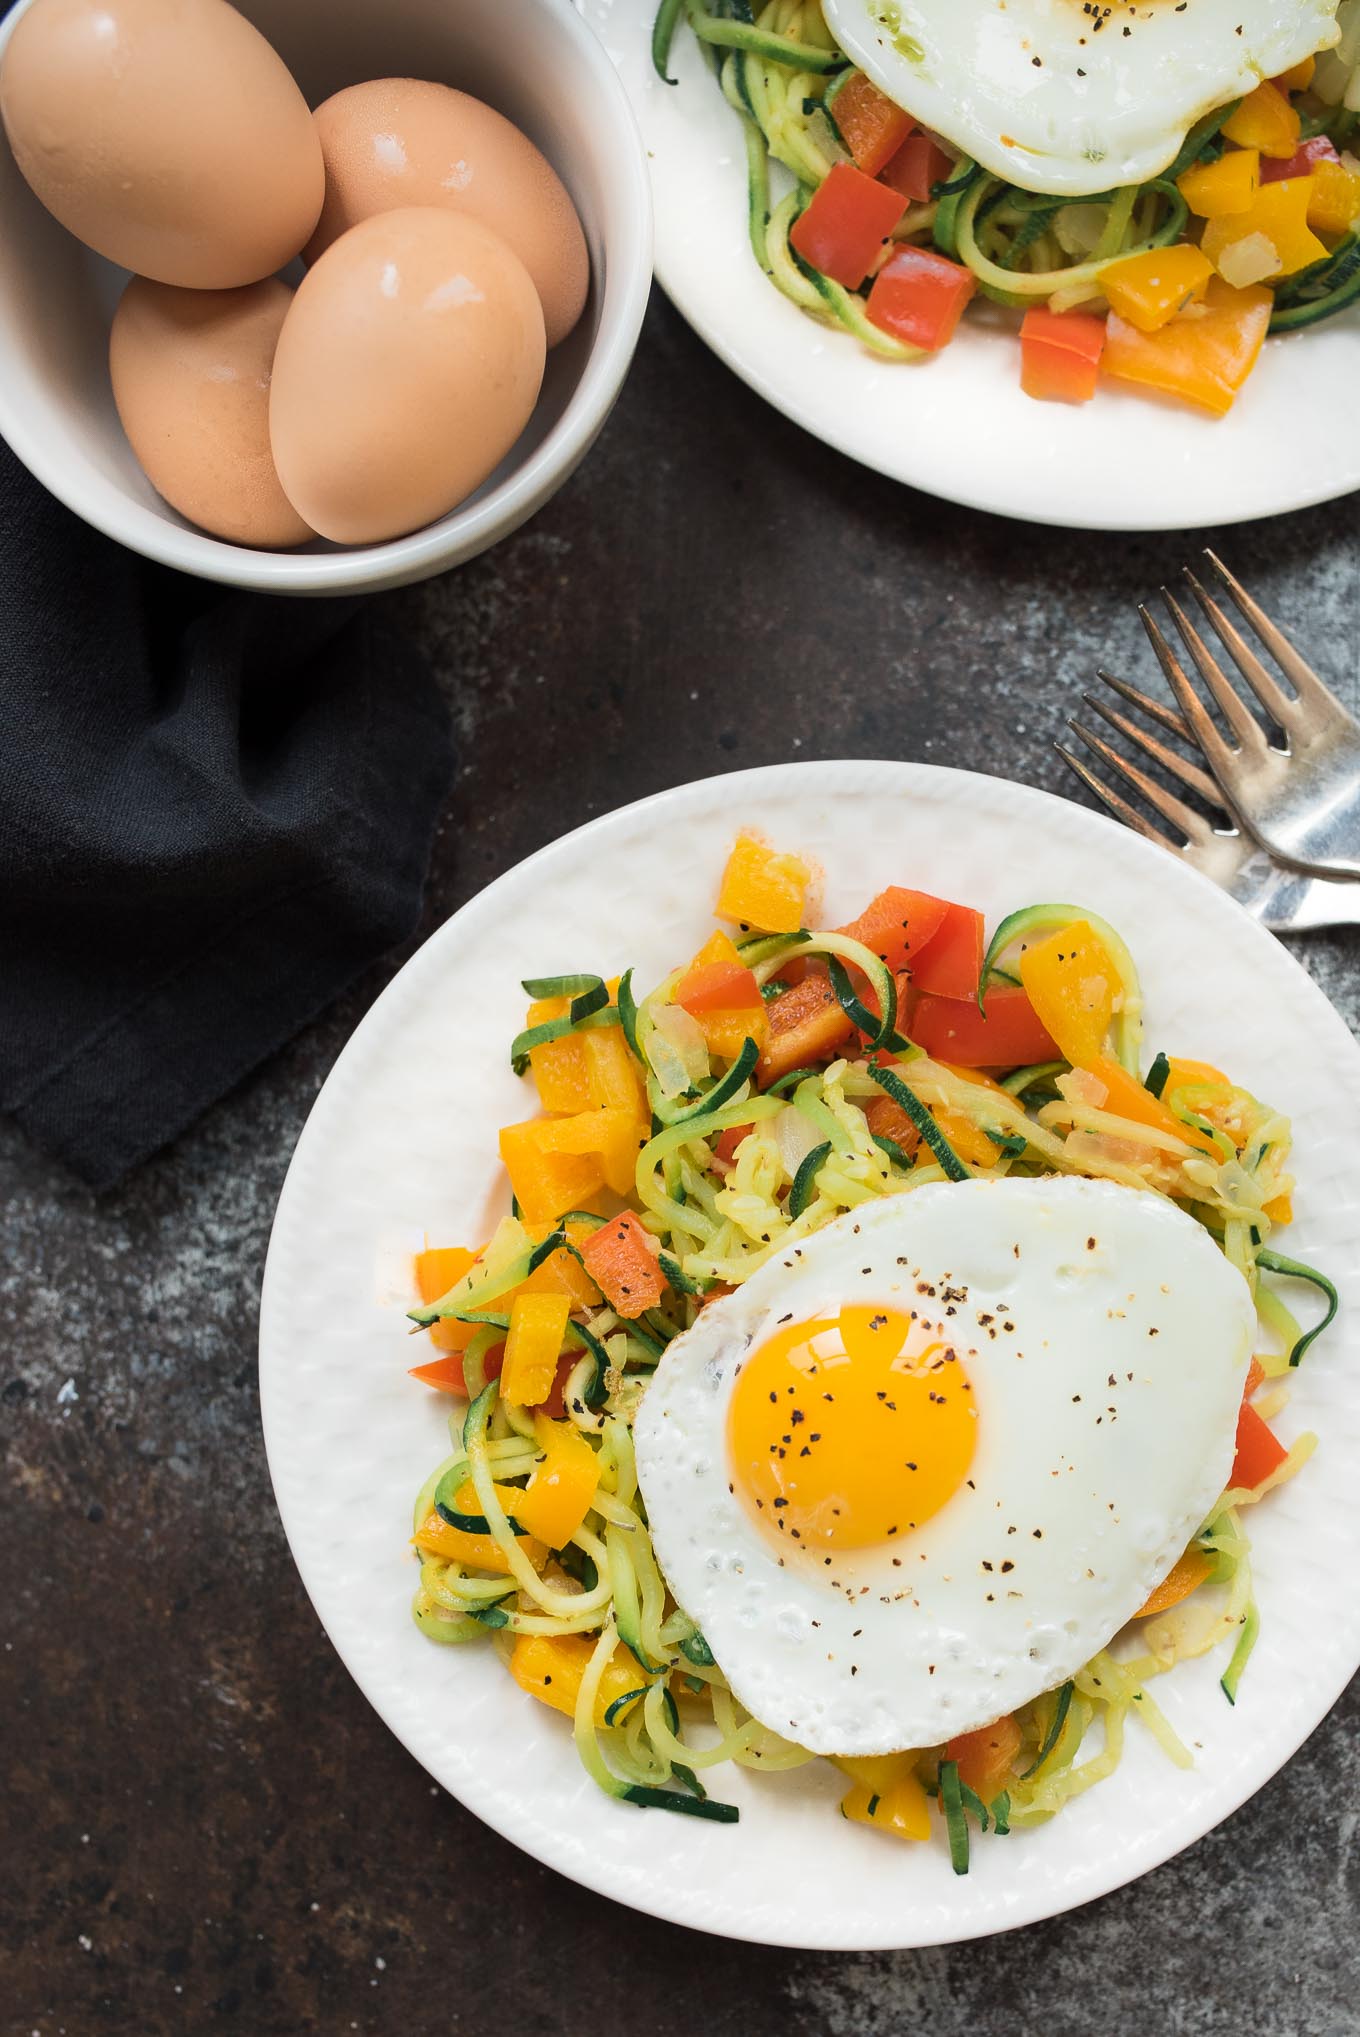 Zucchini Hash With Farm Fresh Eggs- super simple and highly nutritious breakfast! #glutenfree | www.nutritiouseats.com